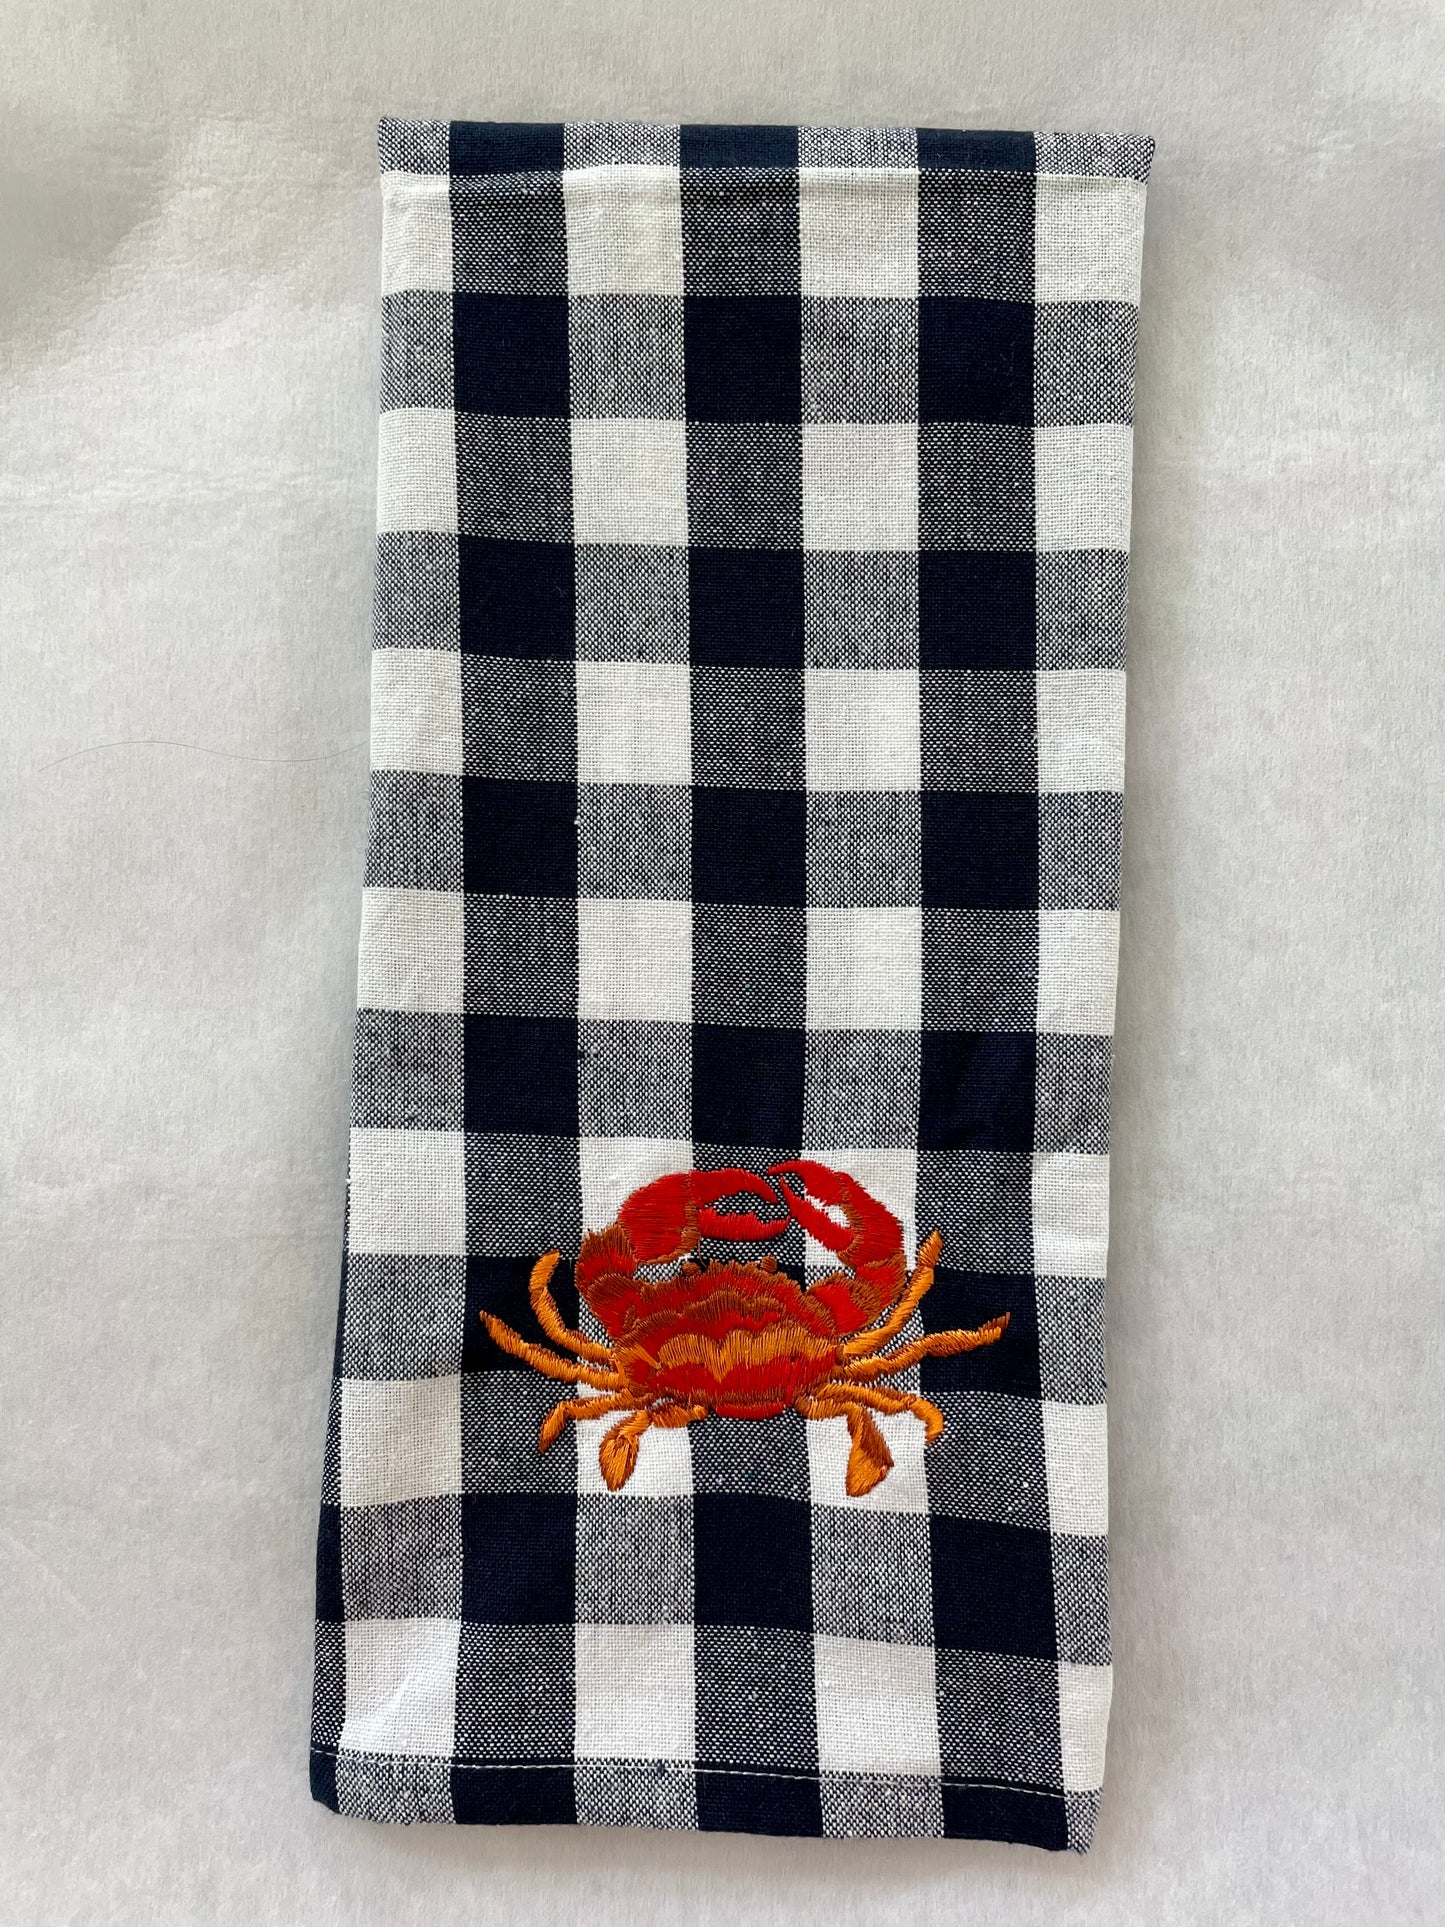 Crab Embroidered Kitchen Towel. Cotton Dish Towels